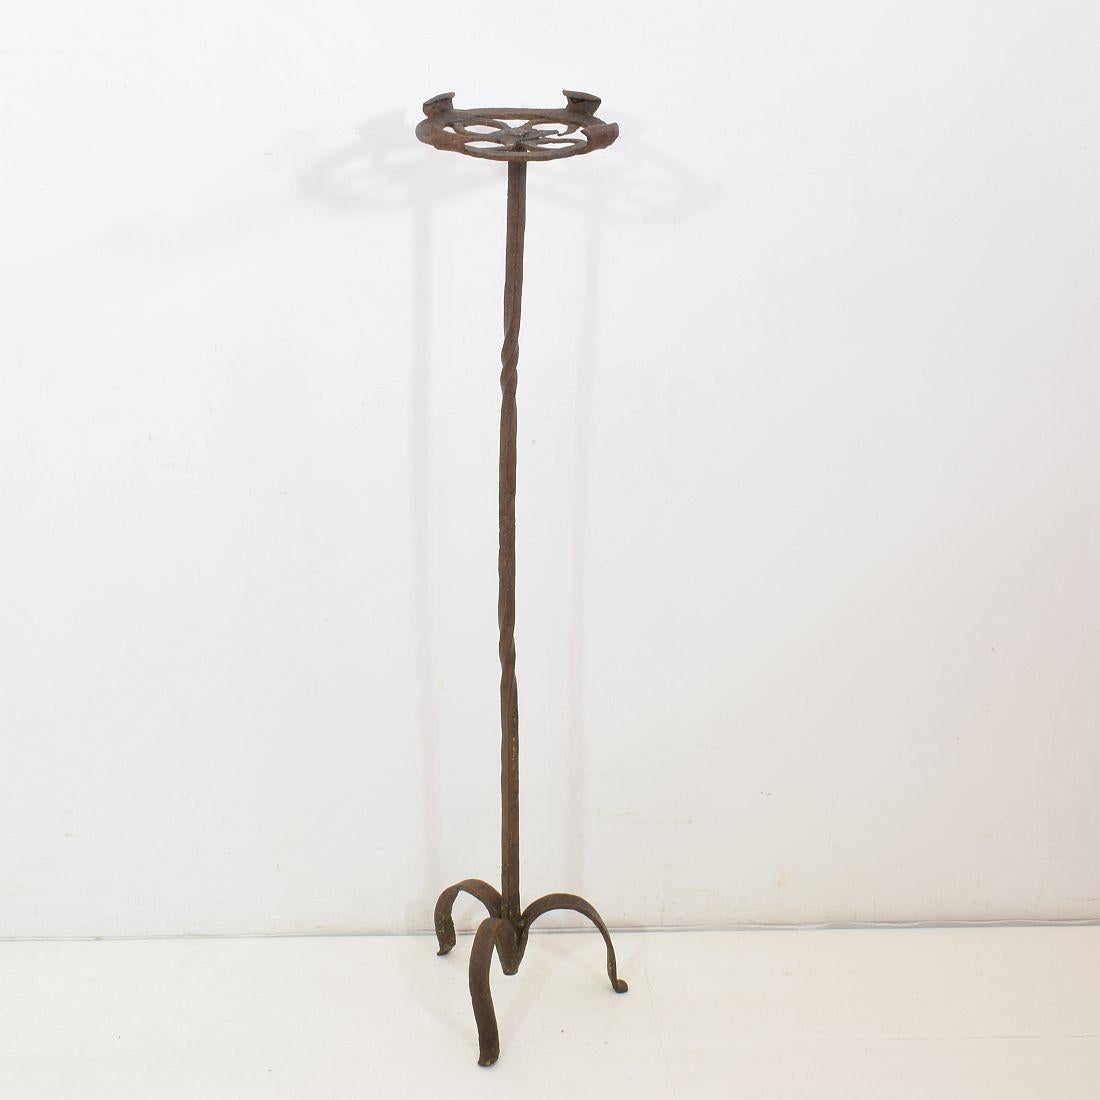 Very old wrought iron candleholder. Unique piece, Spain, circa 1650-1750.